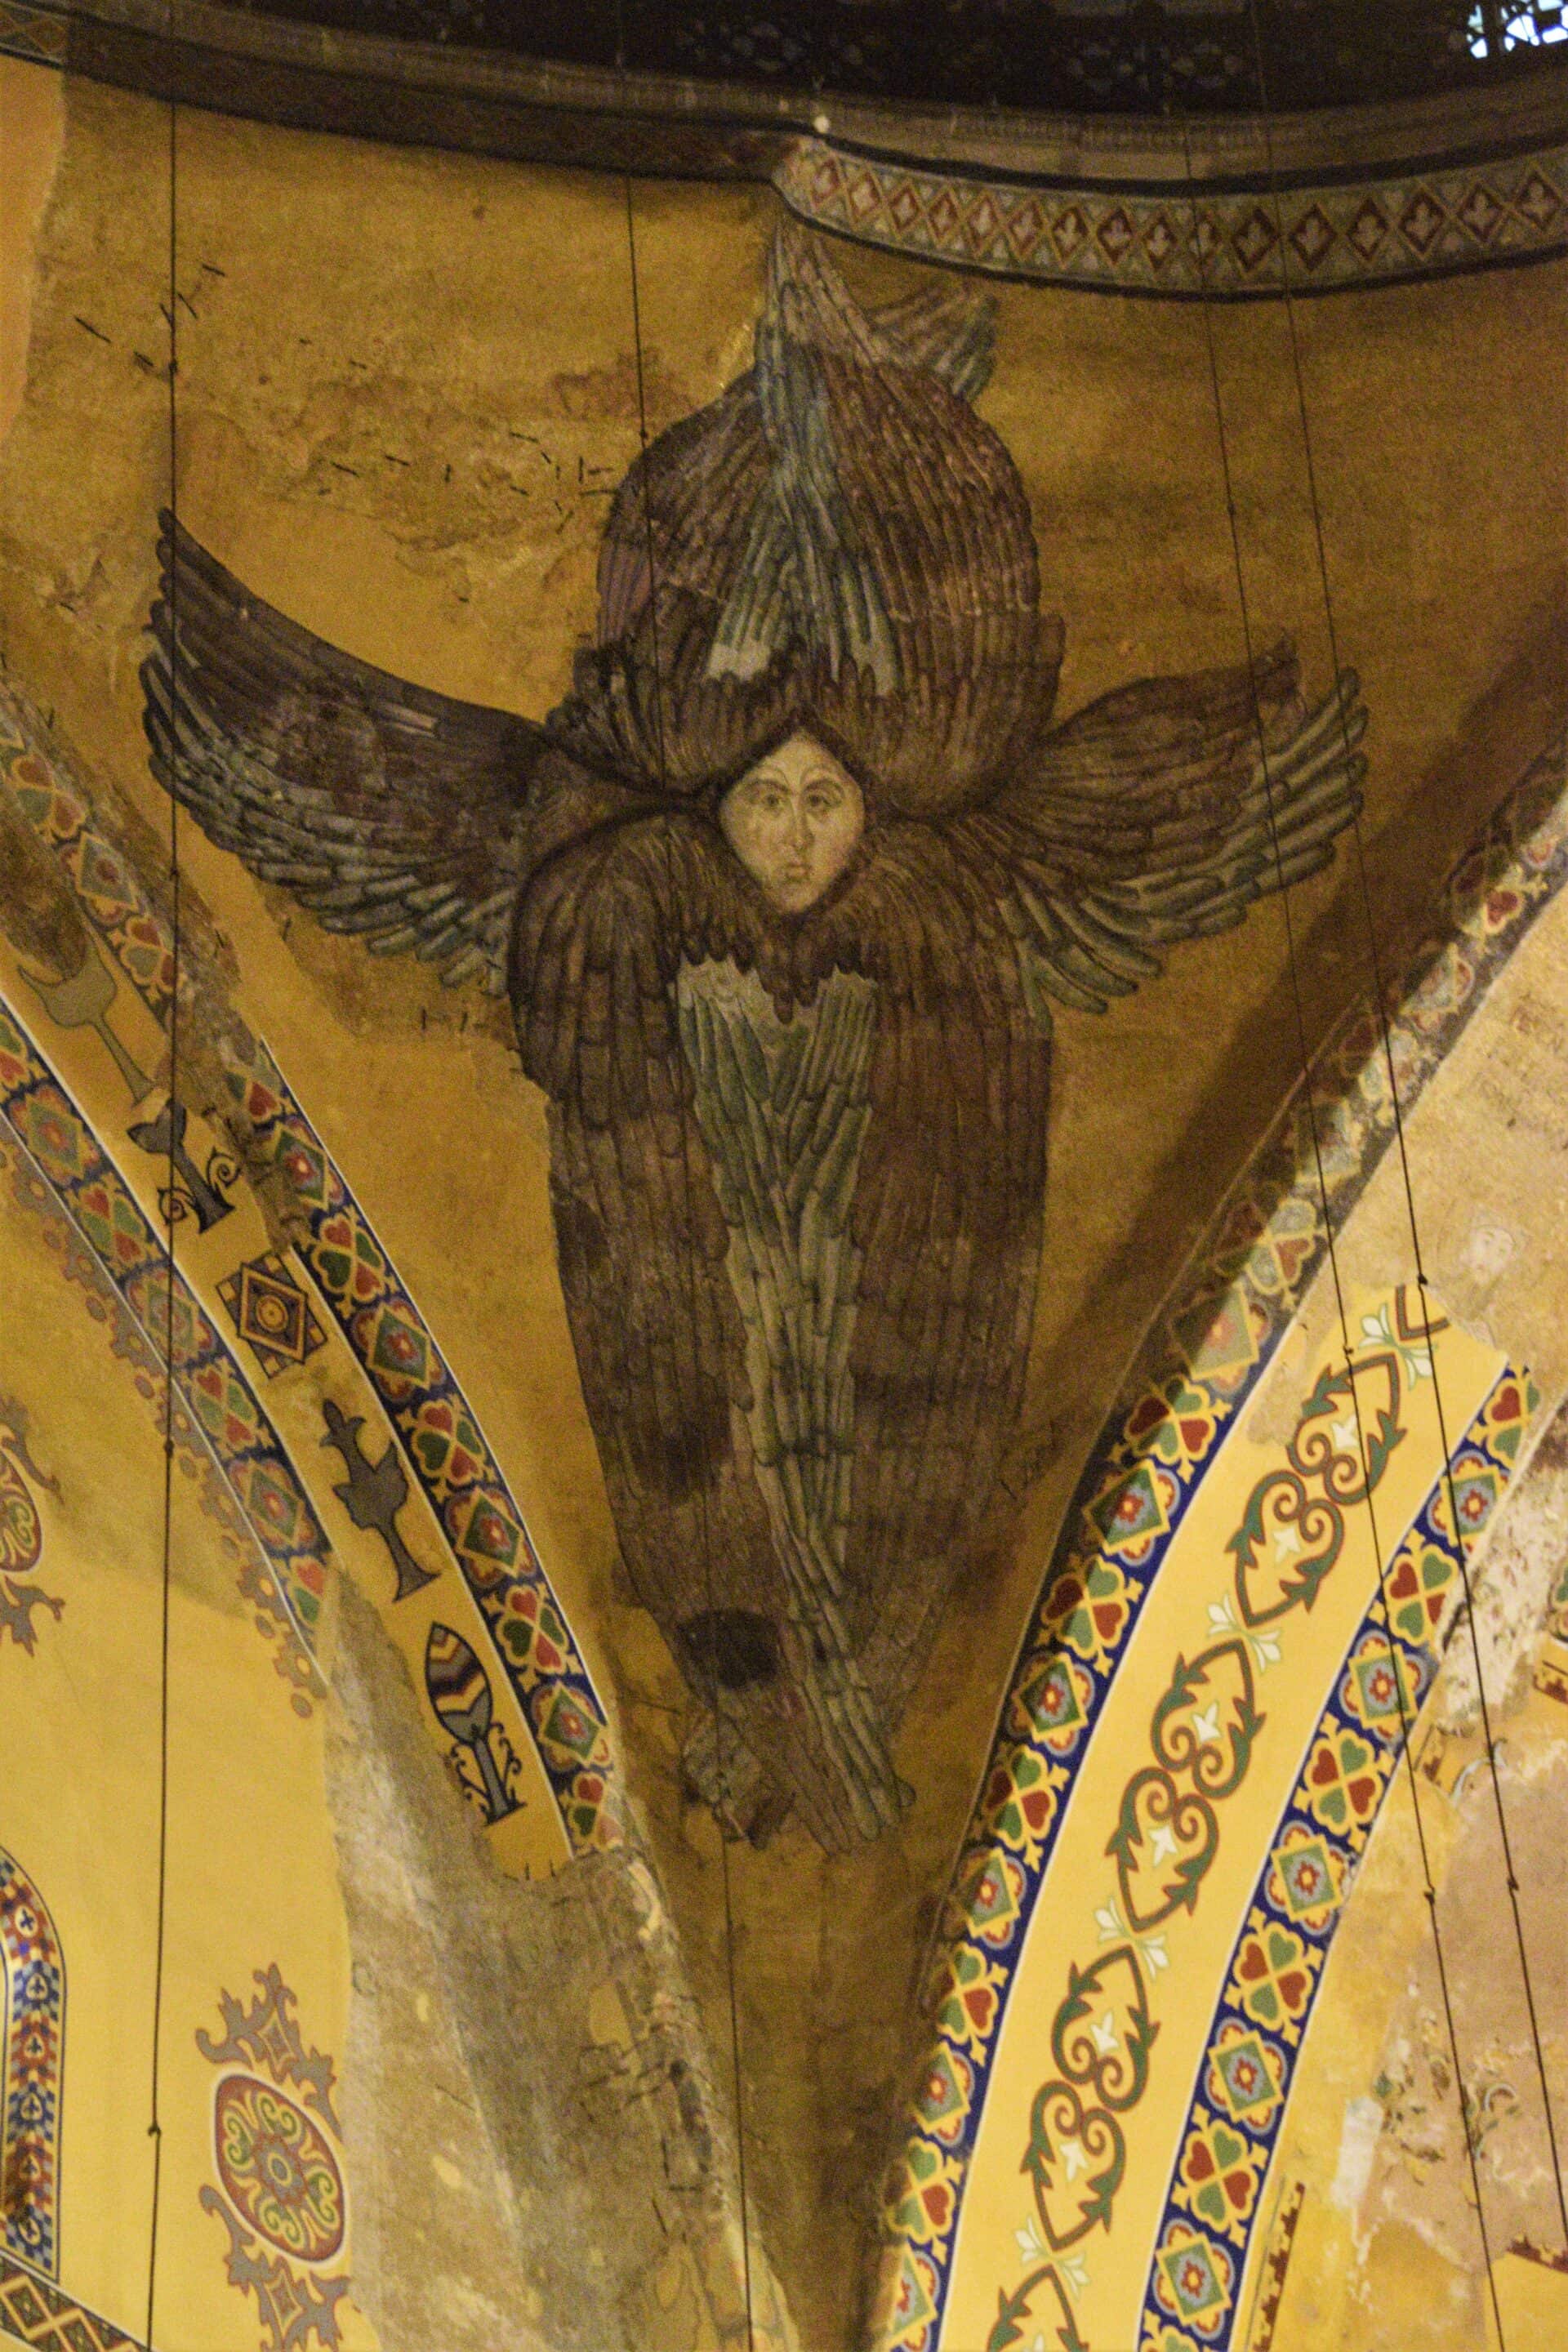 giant mural of an angel on one of the spandrels holding the main dome of the Hagia Sophia